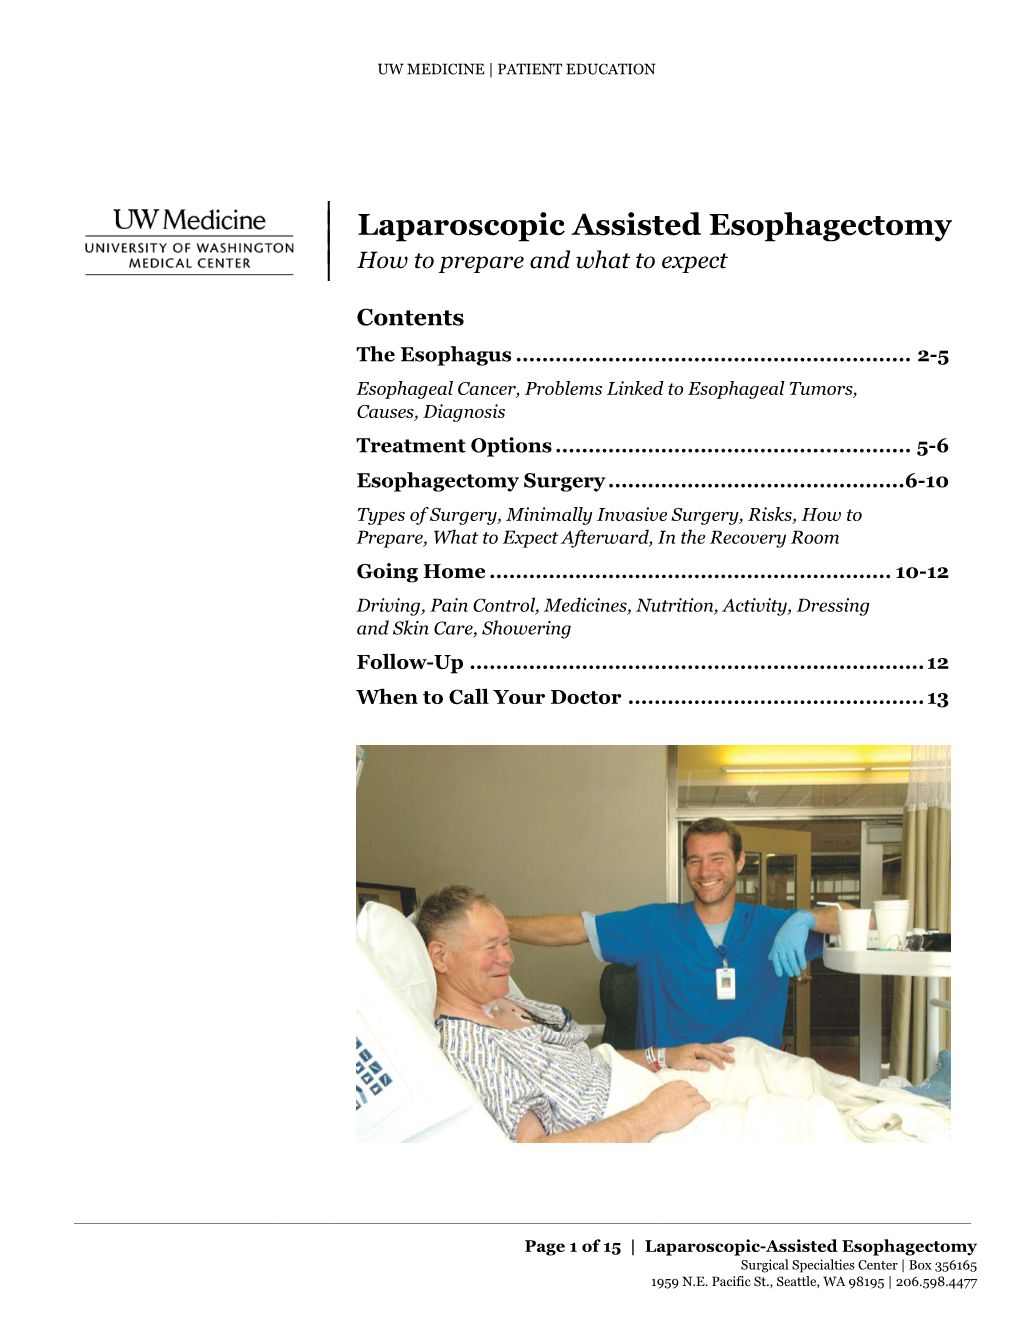 Laparoscopic Assisted Esophagectomy | How to Prepare and What to Expect | Contents the Esophagus